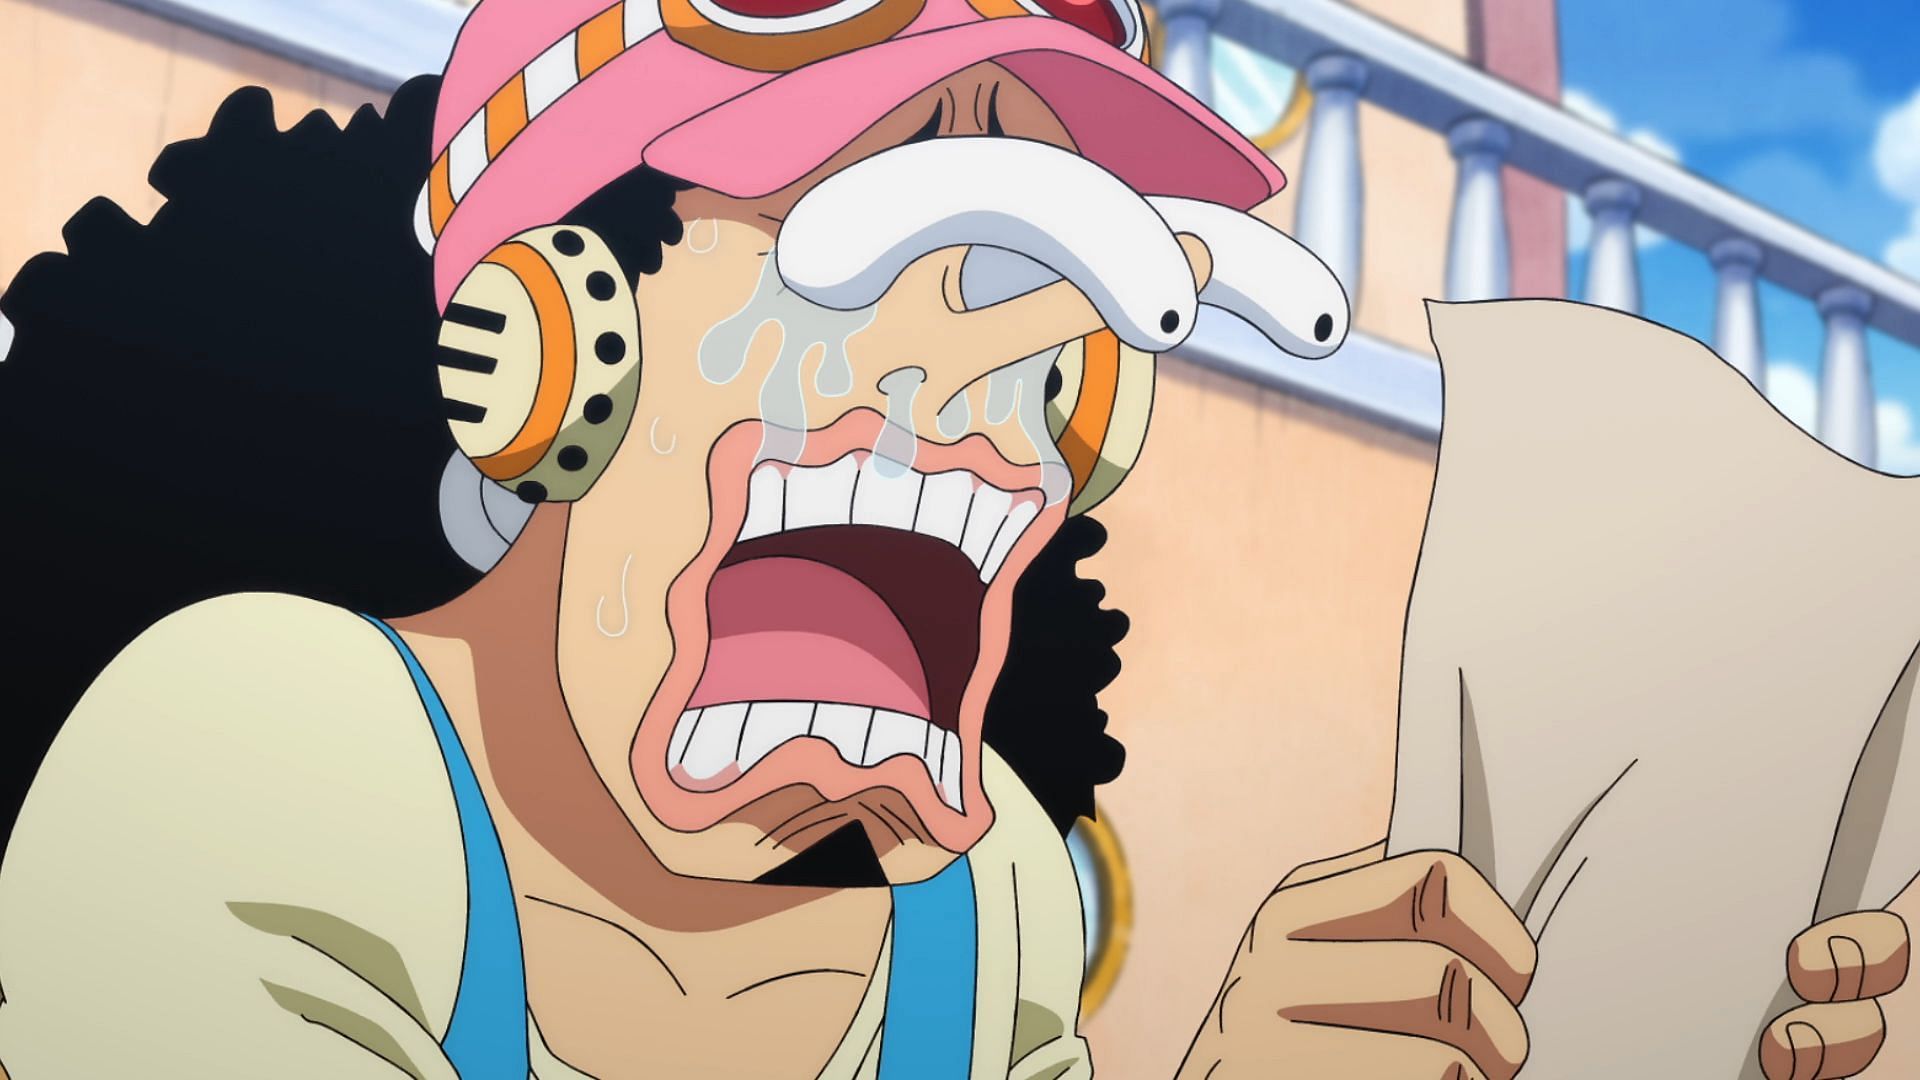 Usopp as seen in the anime series (Image via Toei Animation)